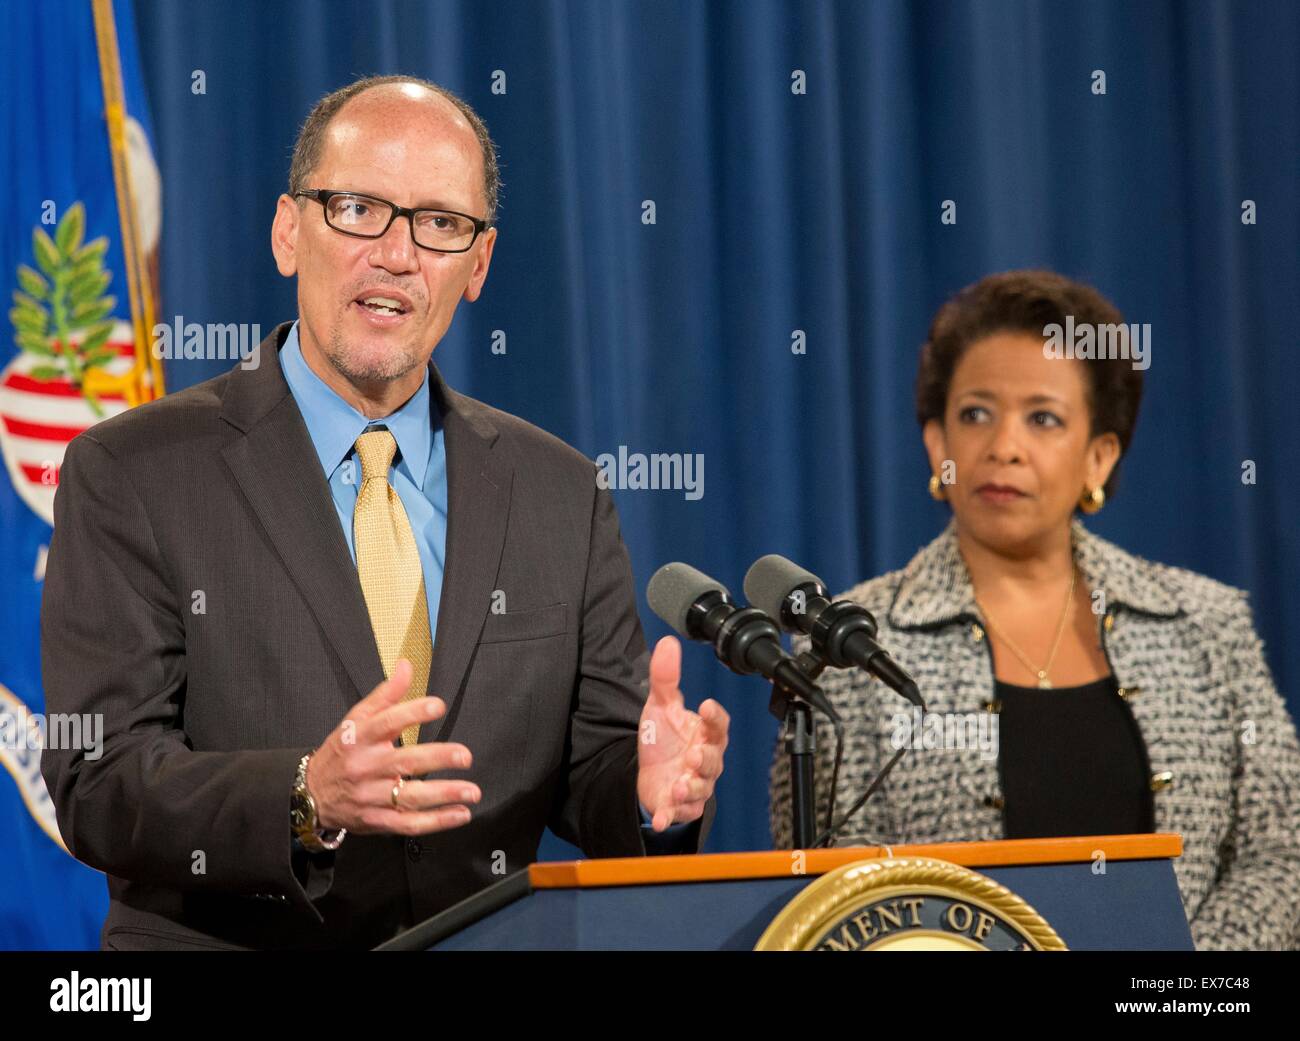 US Secretary of Labor Thomas Perez joins Attorney General Loretta Lynch to discuss ACTeam Phase II implementation in combating human trafficking during a press conference June 25, 2015 in Washington, DC. Stock Photo